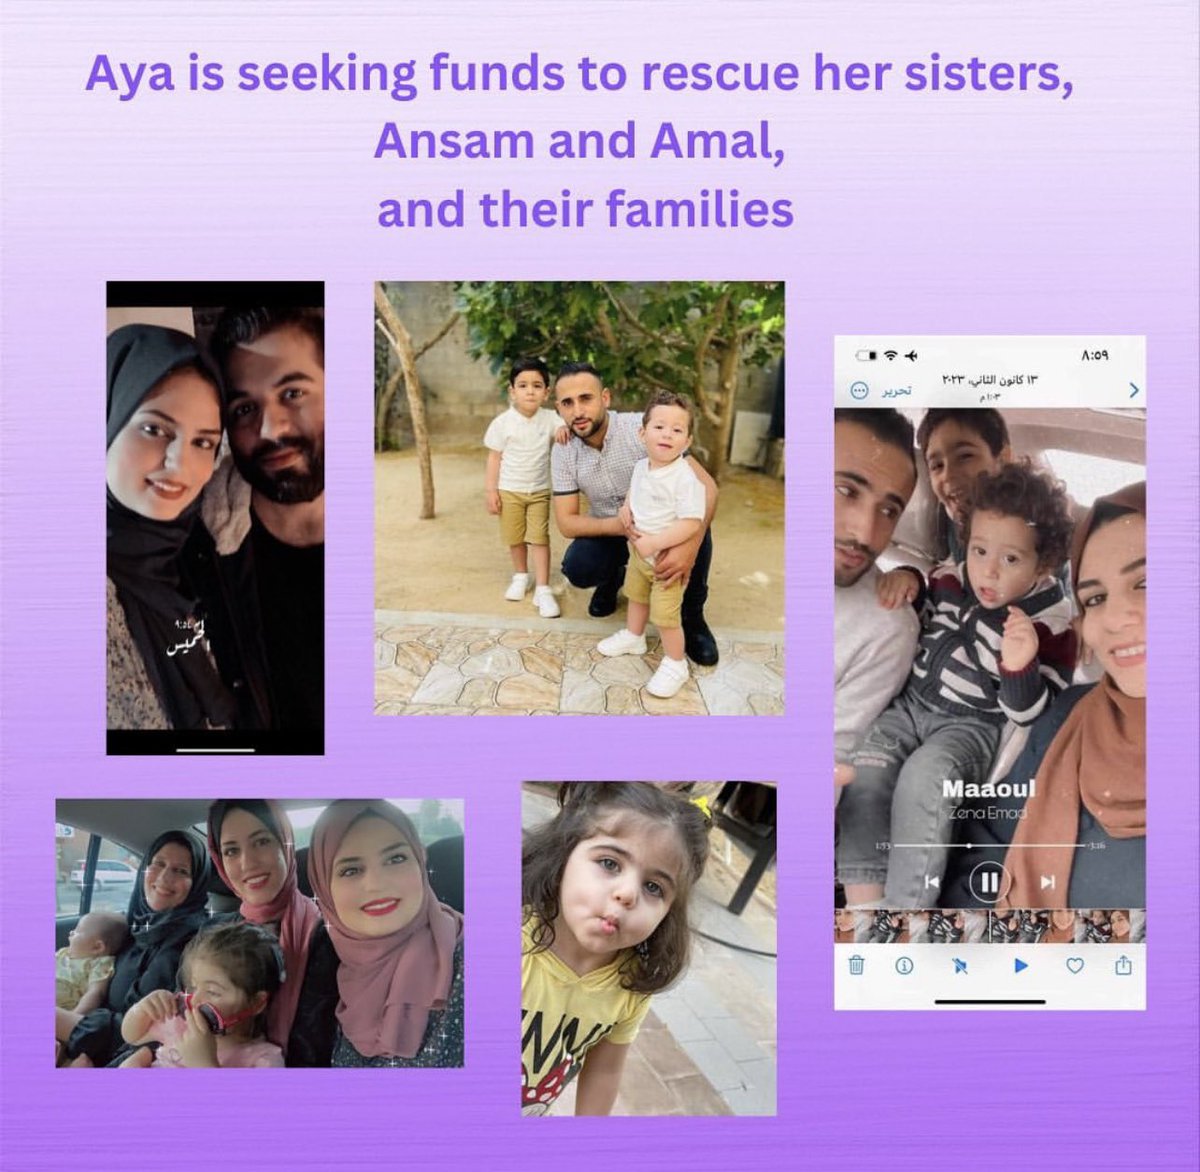 #Reposted from my dear friend @rajviedesai Describing my situation fighting in all possible ways to rescue my family and reunite with them. Your little support can give a big hope and chance to rescue lives 🙏🏻 Please share the link: gofund.me/0aaf2816 👇🏼